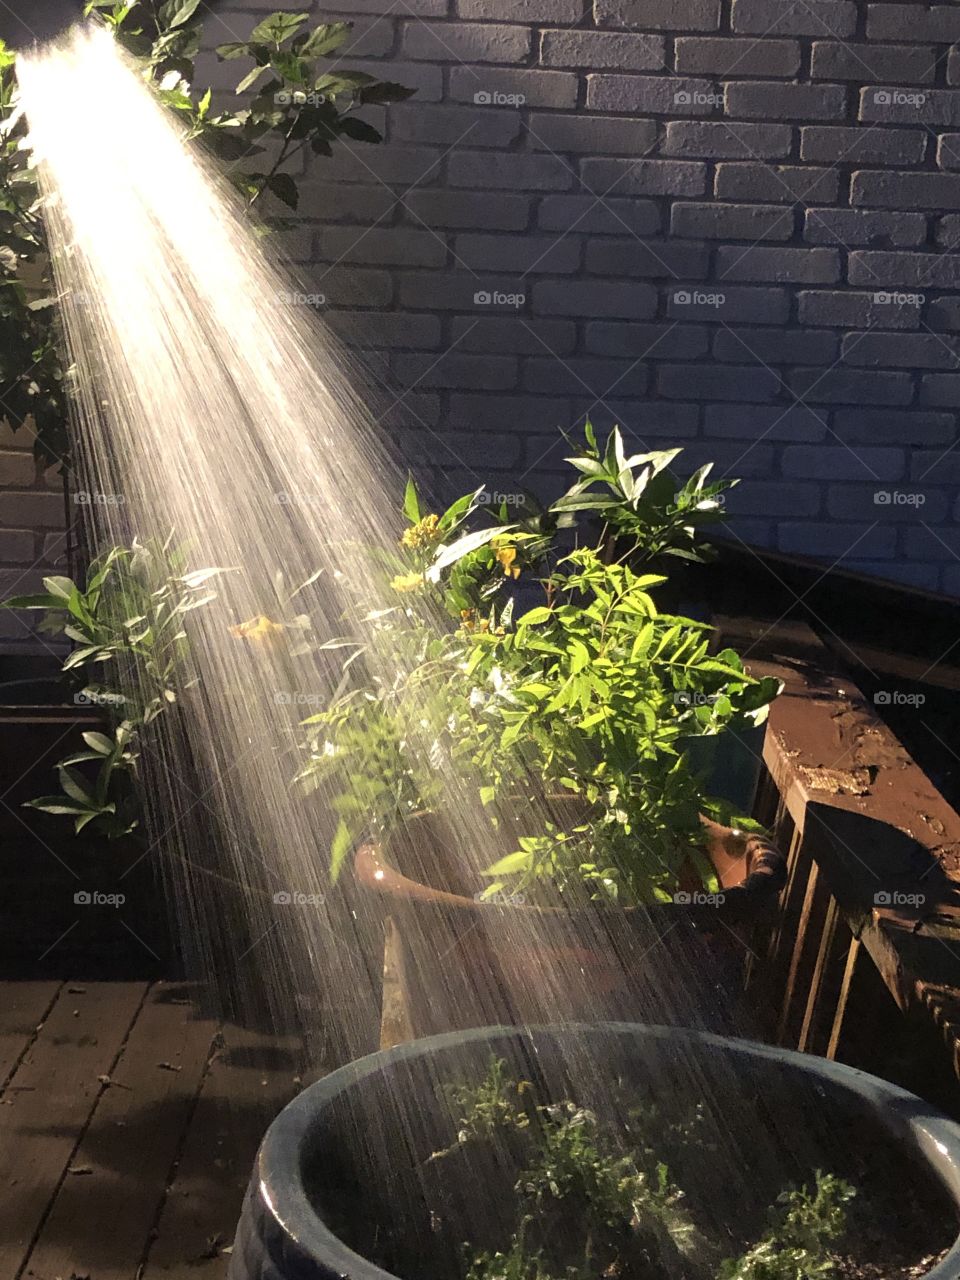 Amazingly cool effect of backlit water spray into plants